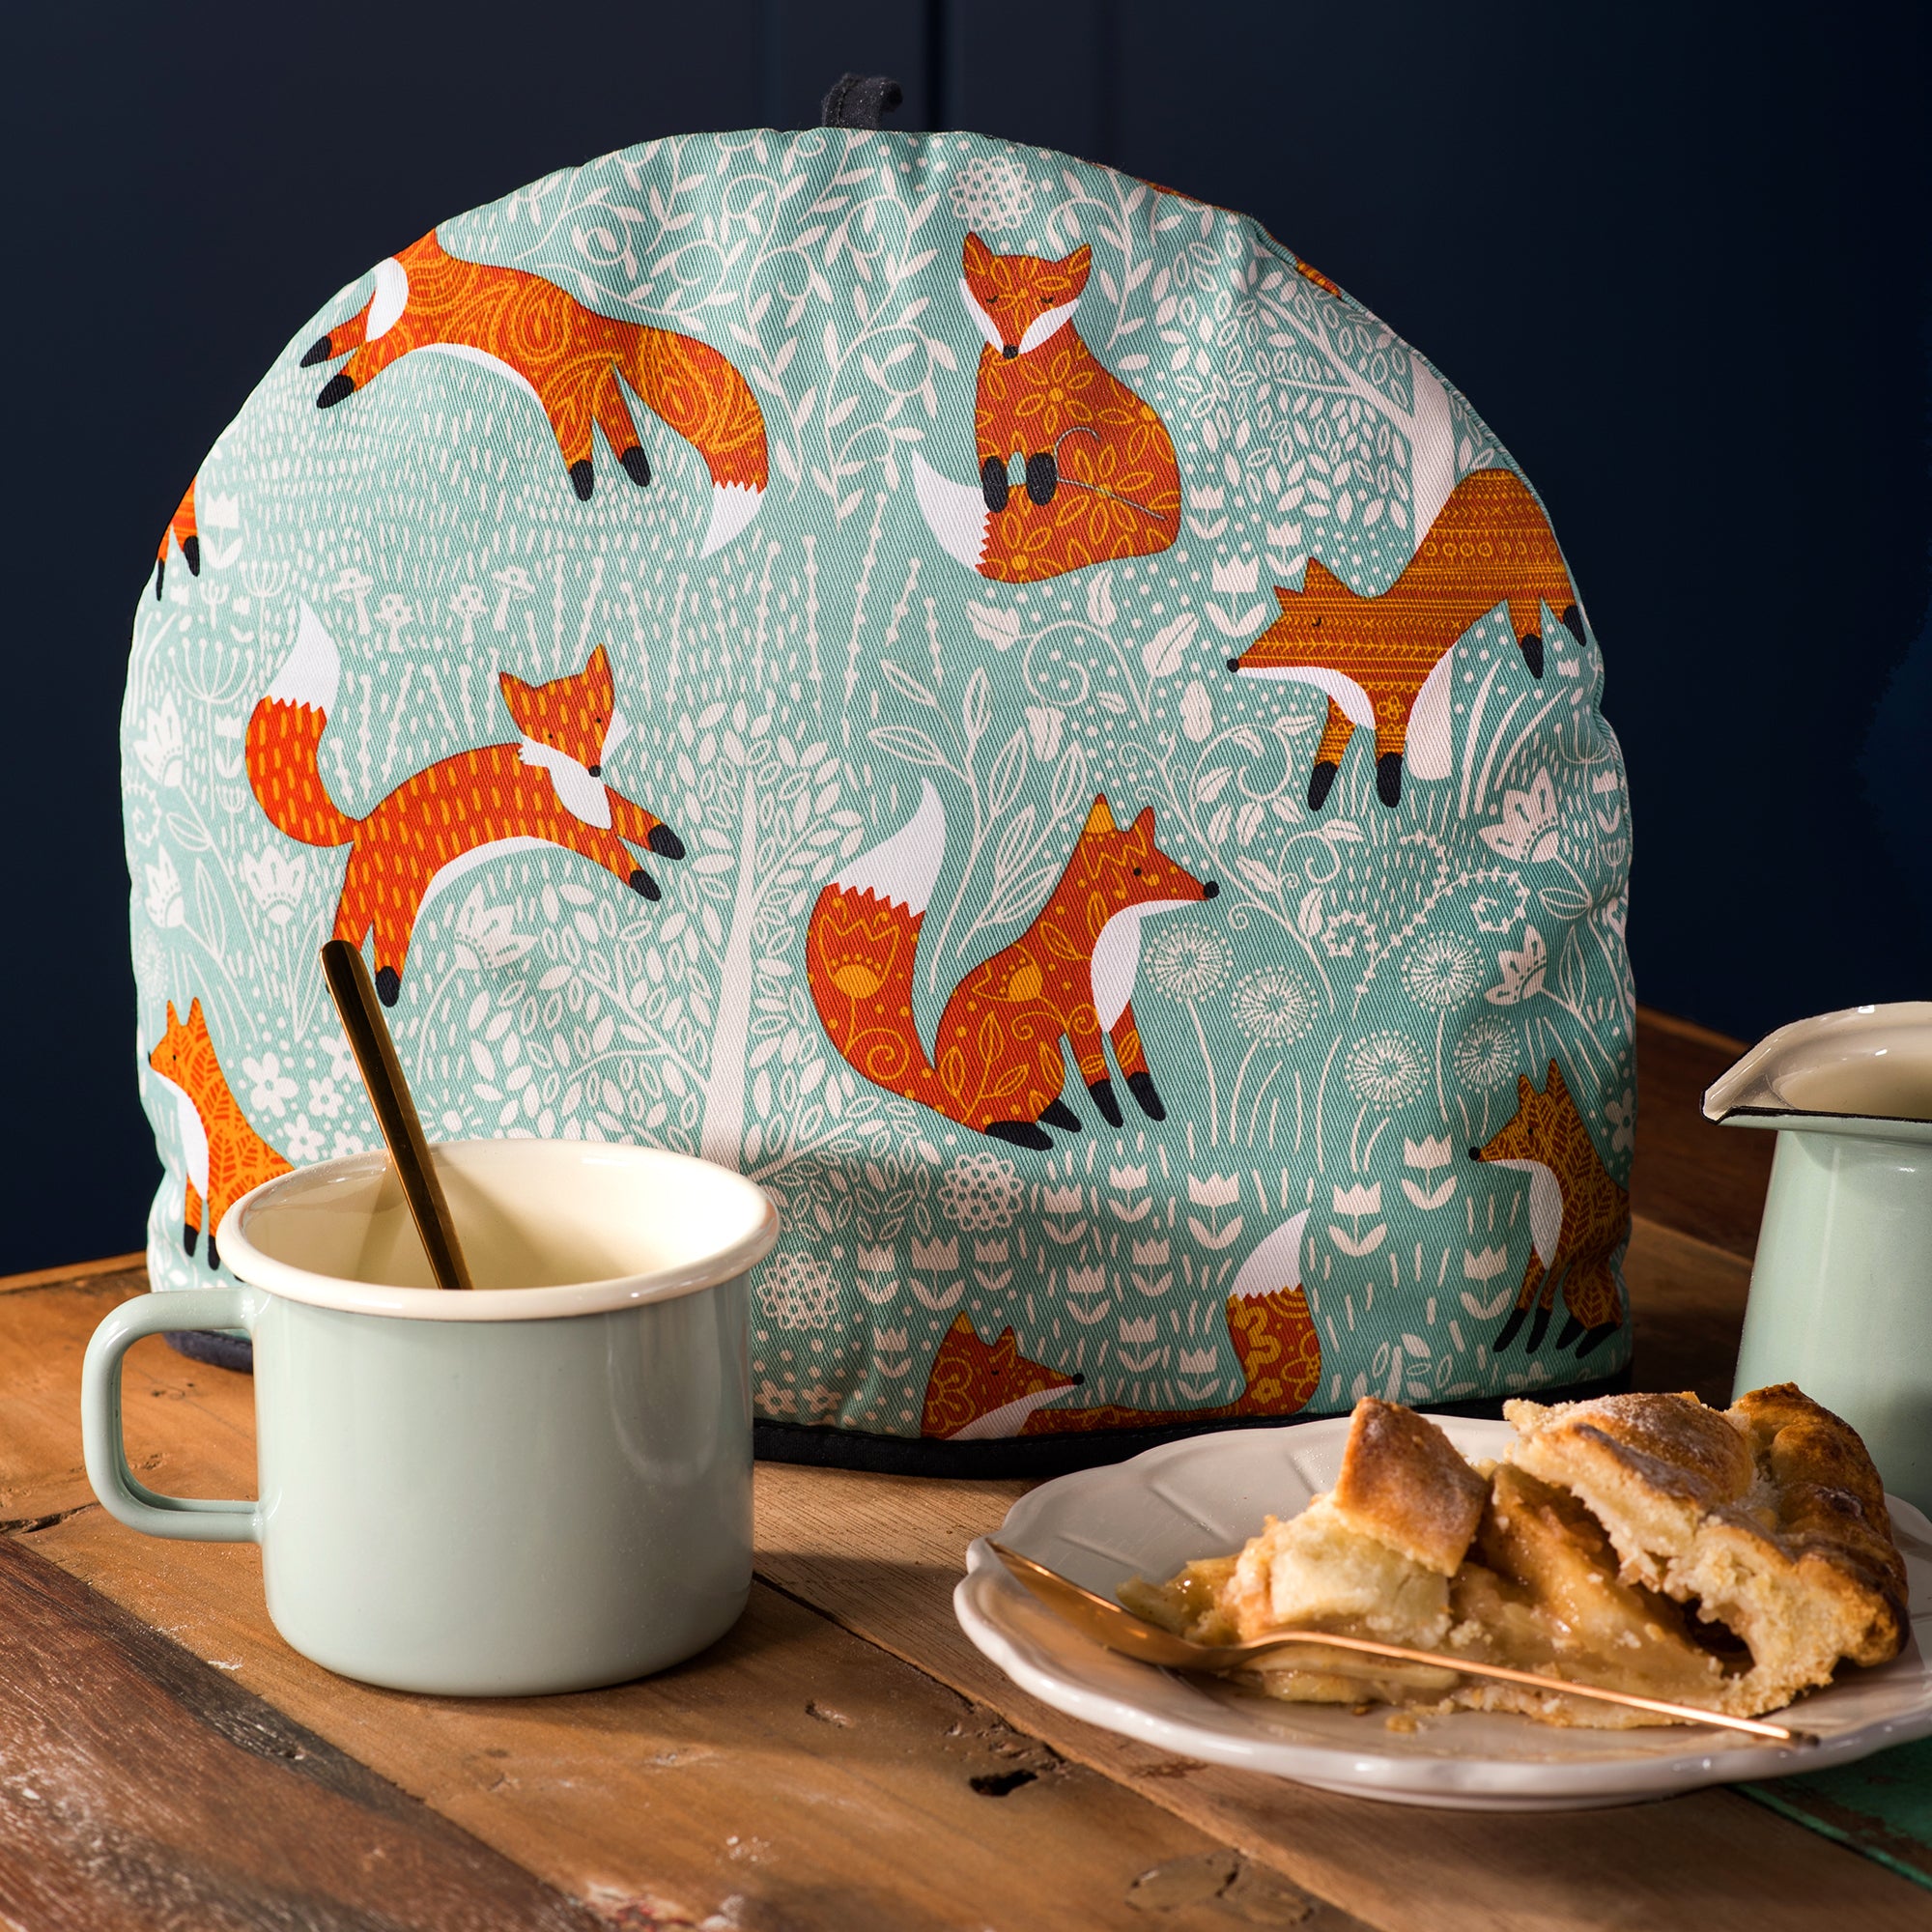 Ulster Weavers Tea Cosy - Foraging Fox (100% Cotton Outer; 100% Polyester wadding; CE marked, Blue, 6 Cup Teapot) - Tea Cosy - Ulster Weavers